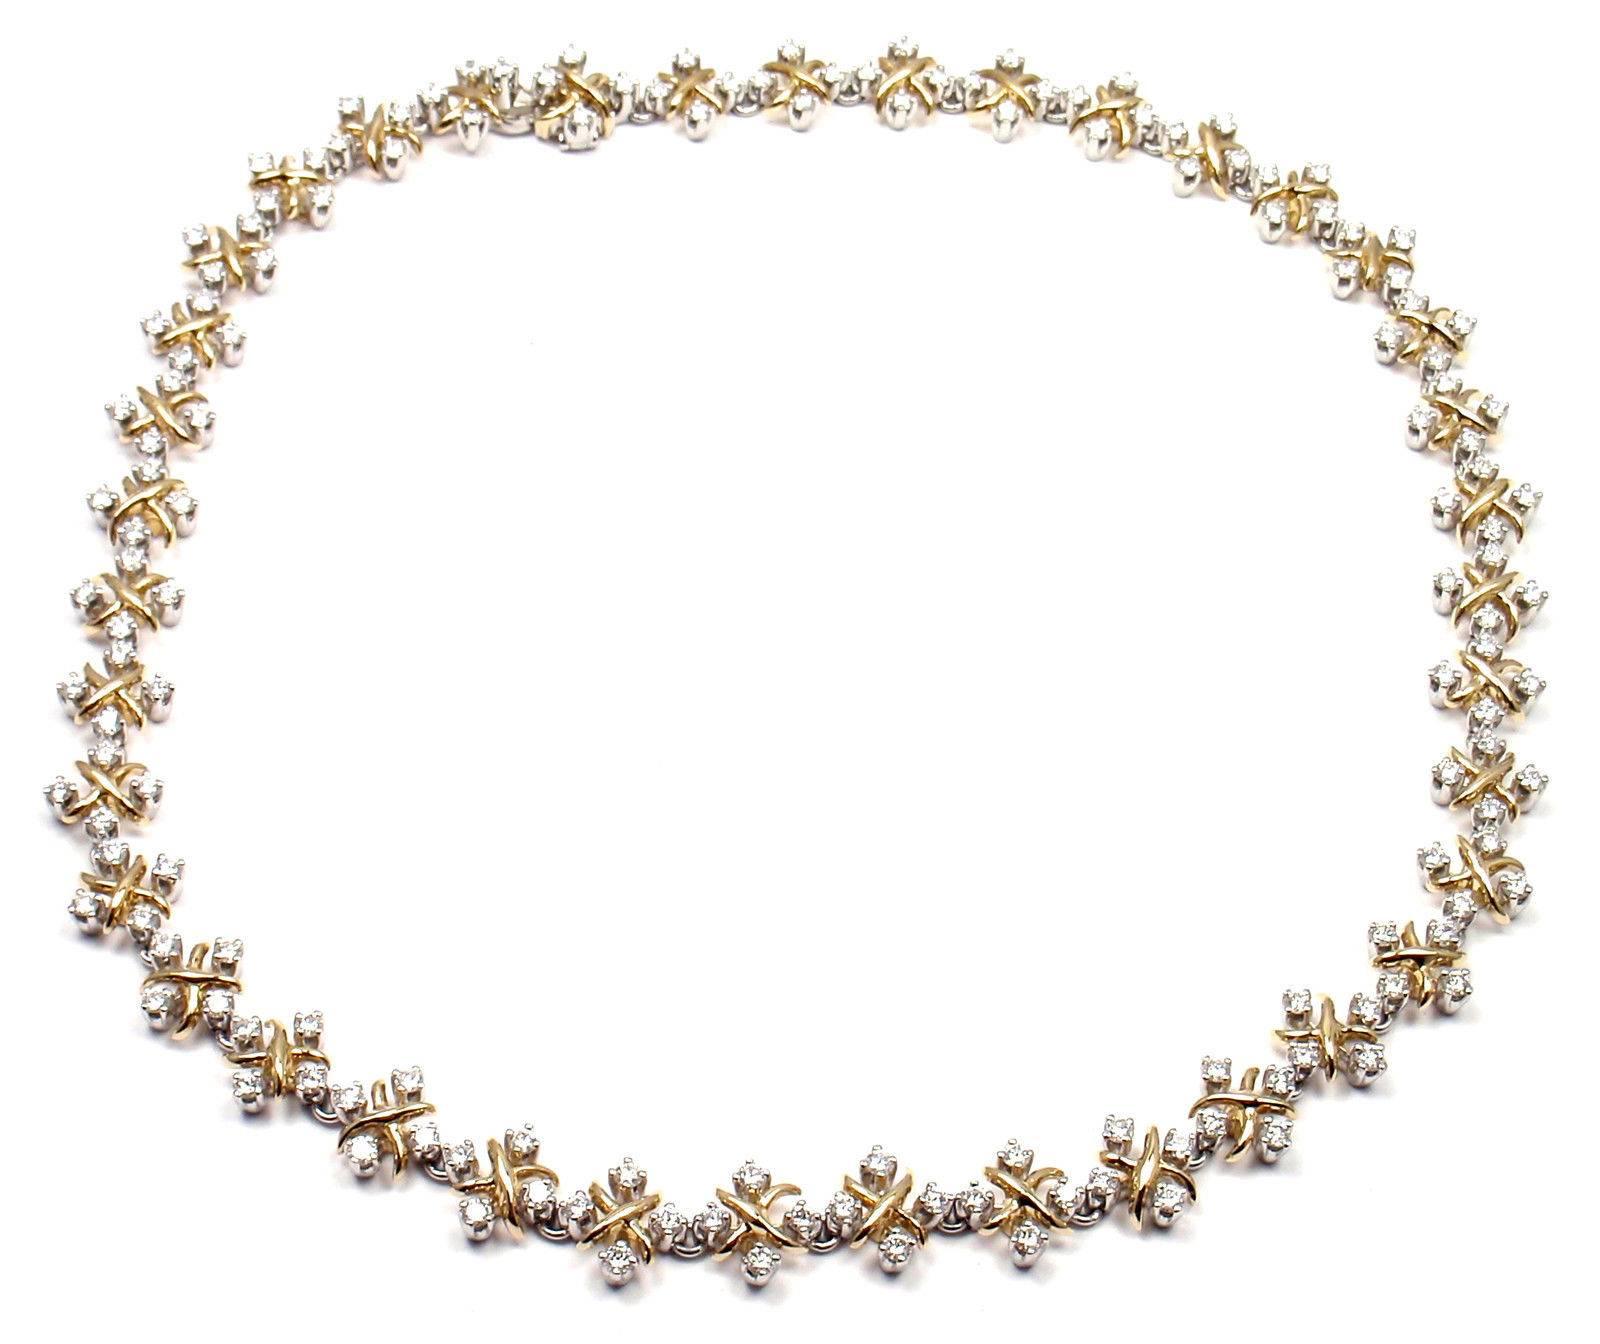 18k Yellow Gold & Platinum Diamond Lynn Necklace by Tiffany & Co. 
With 156 round brilliant cut diamonds VS1 clarity G color 
total weight approx. 5.29ct
This necklace comes with Tiffany Co service paper.

Details: 
Weight: 60.9 grams
Width: